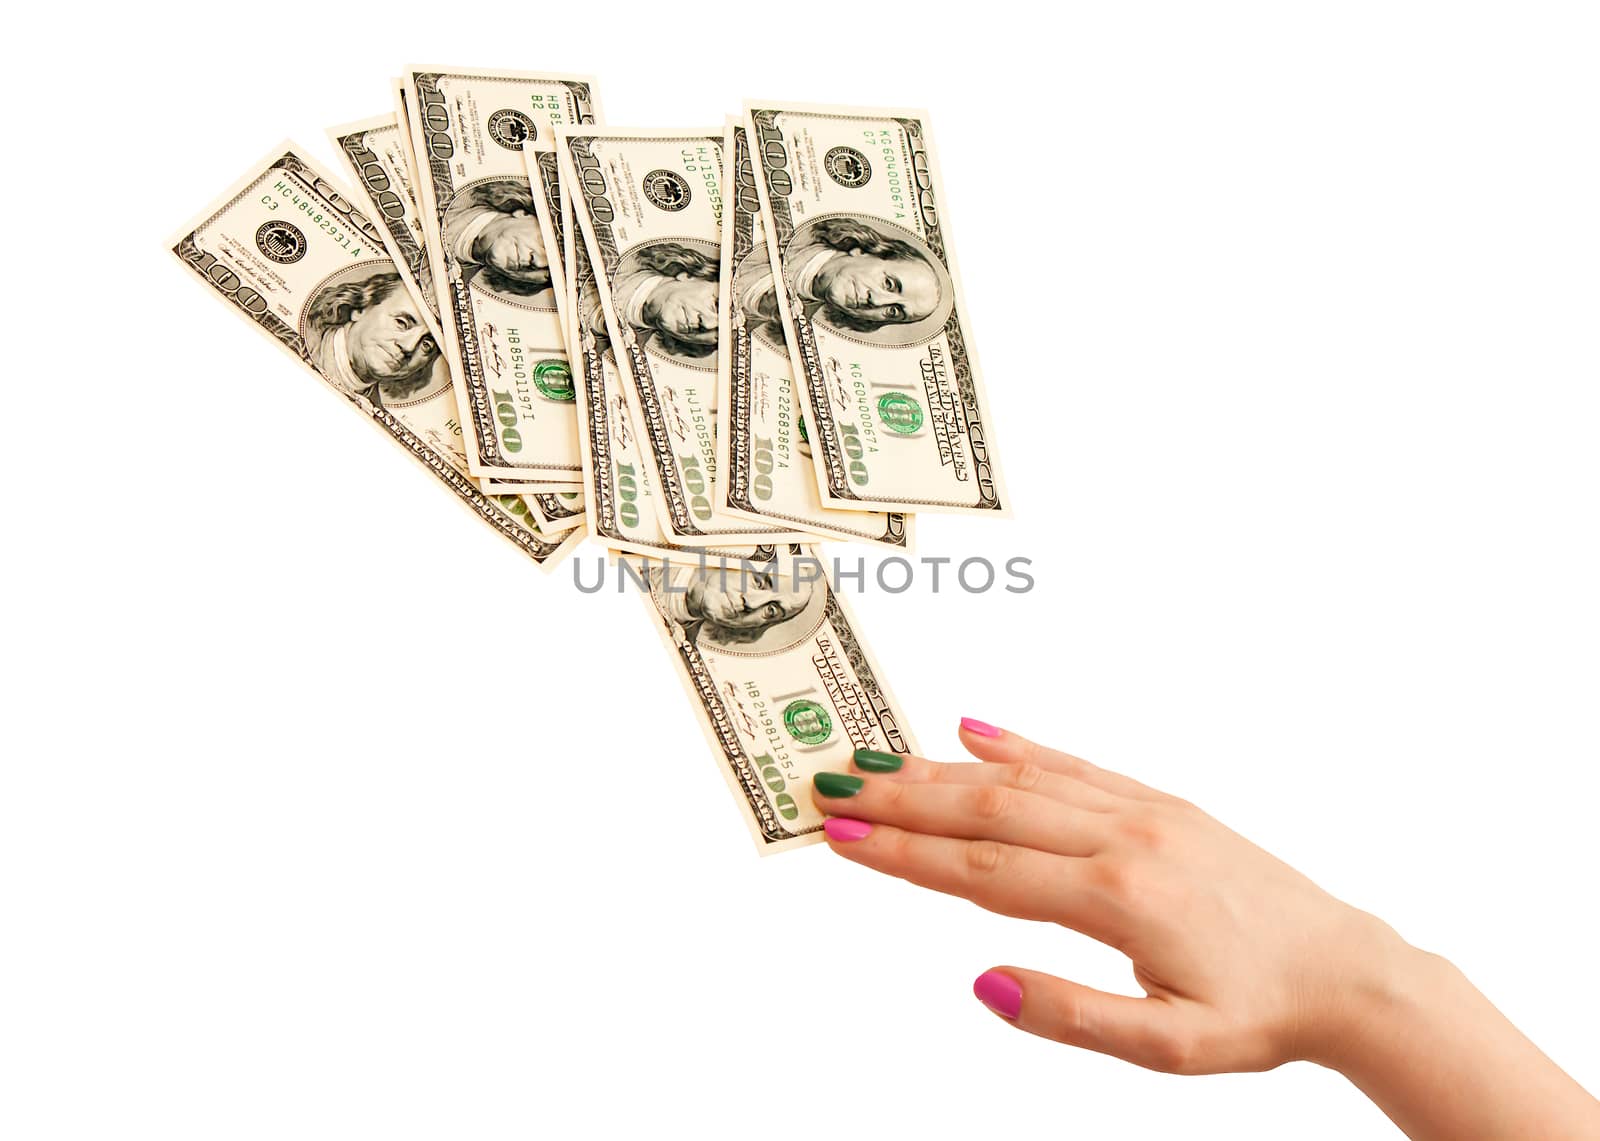 Woman’s hand taking a 100 dollar note from many banknotes, isolated on white background
